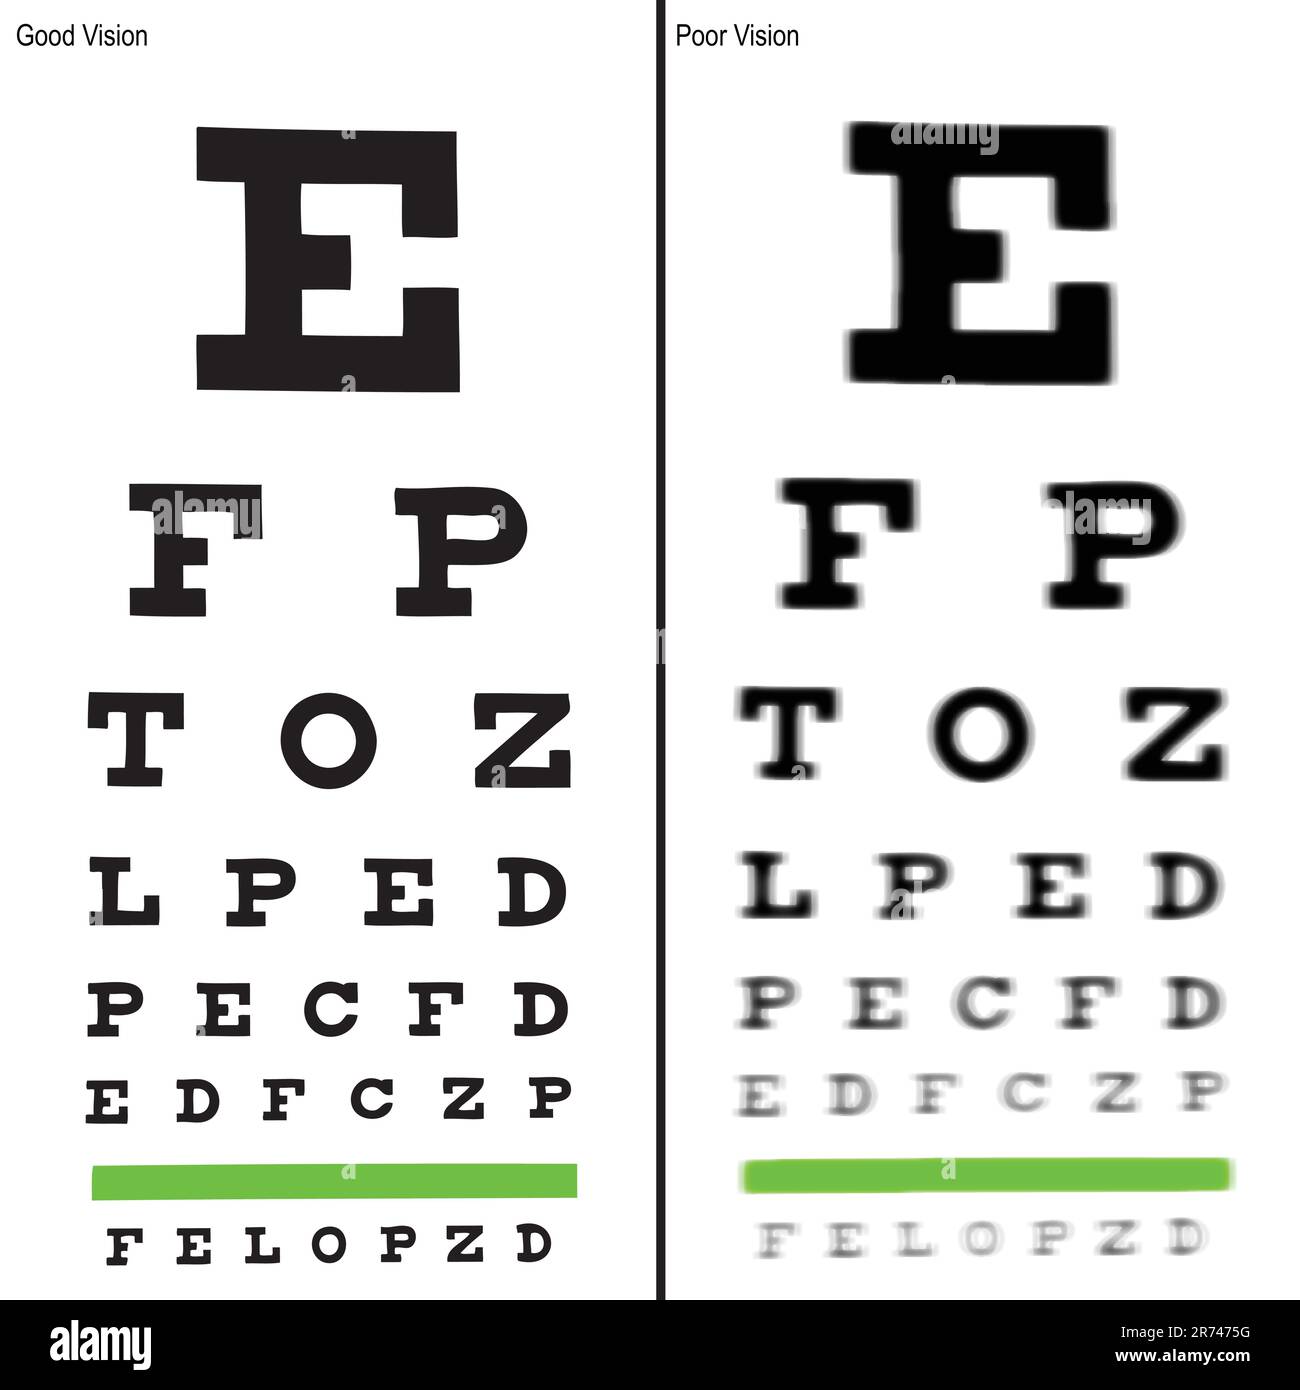 Good and Poor Eye Chart Illustrations. Stock Vector